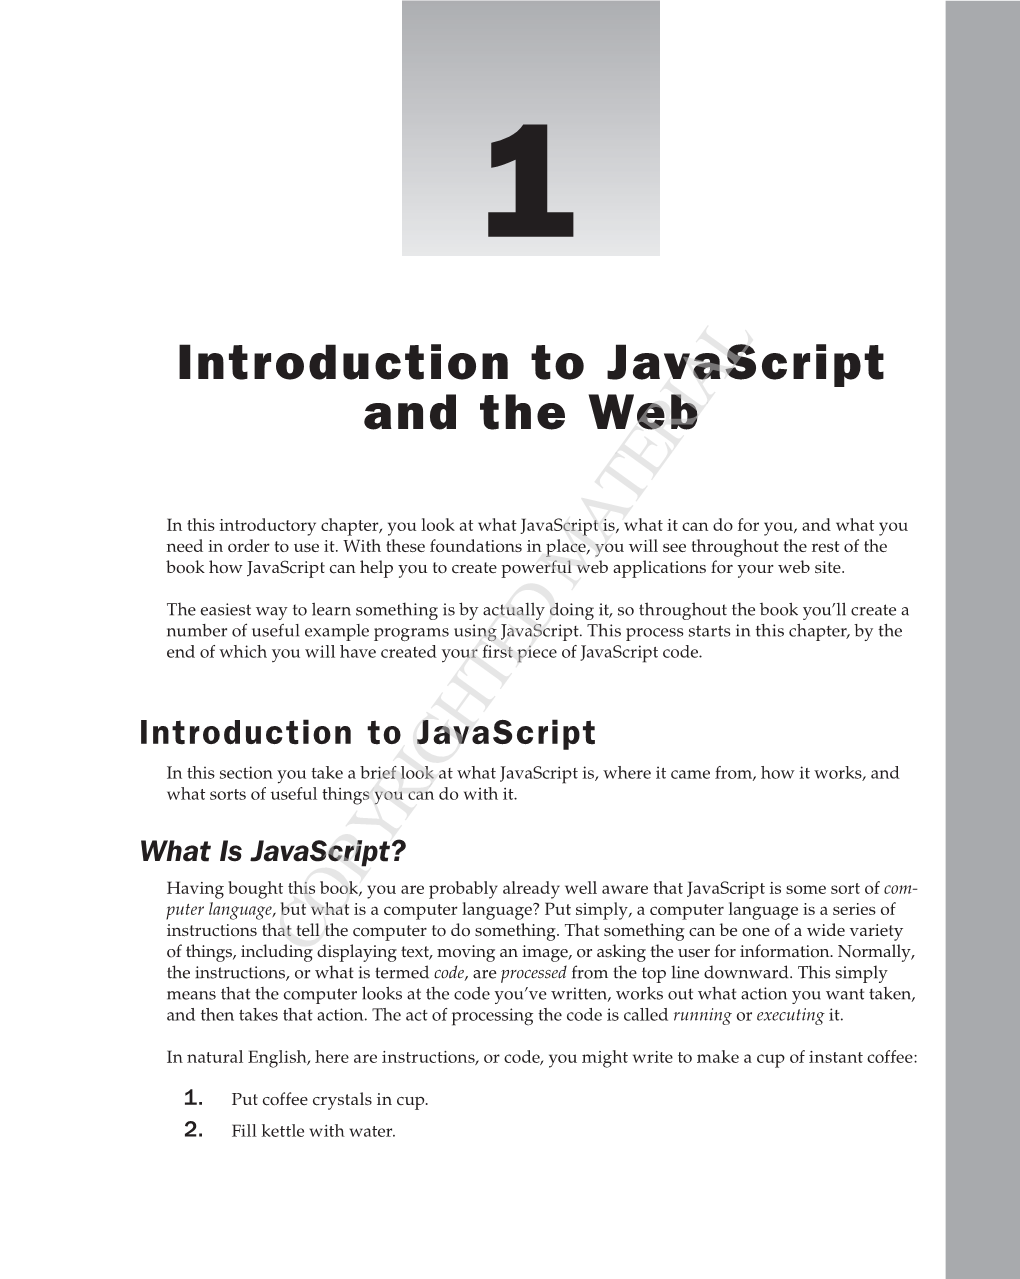 Why Choose Javascript? Javascript Is Not the Only Scripting Language; There Are Others Such As Vbscript and Perl